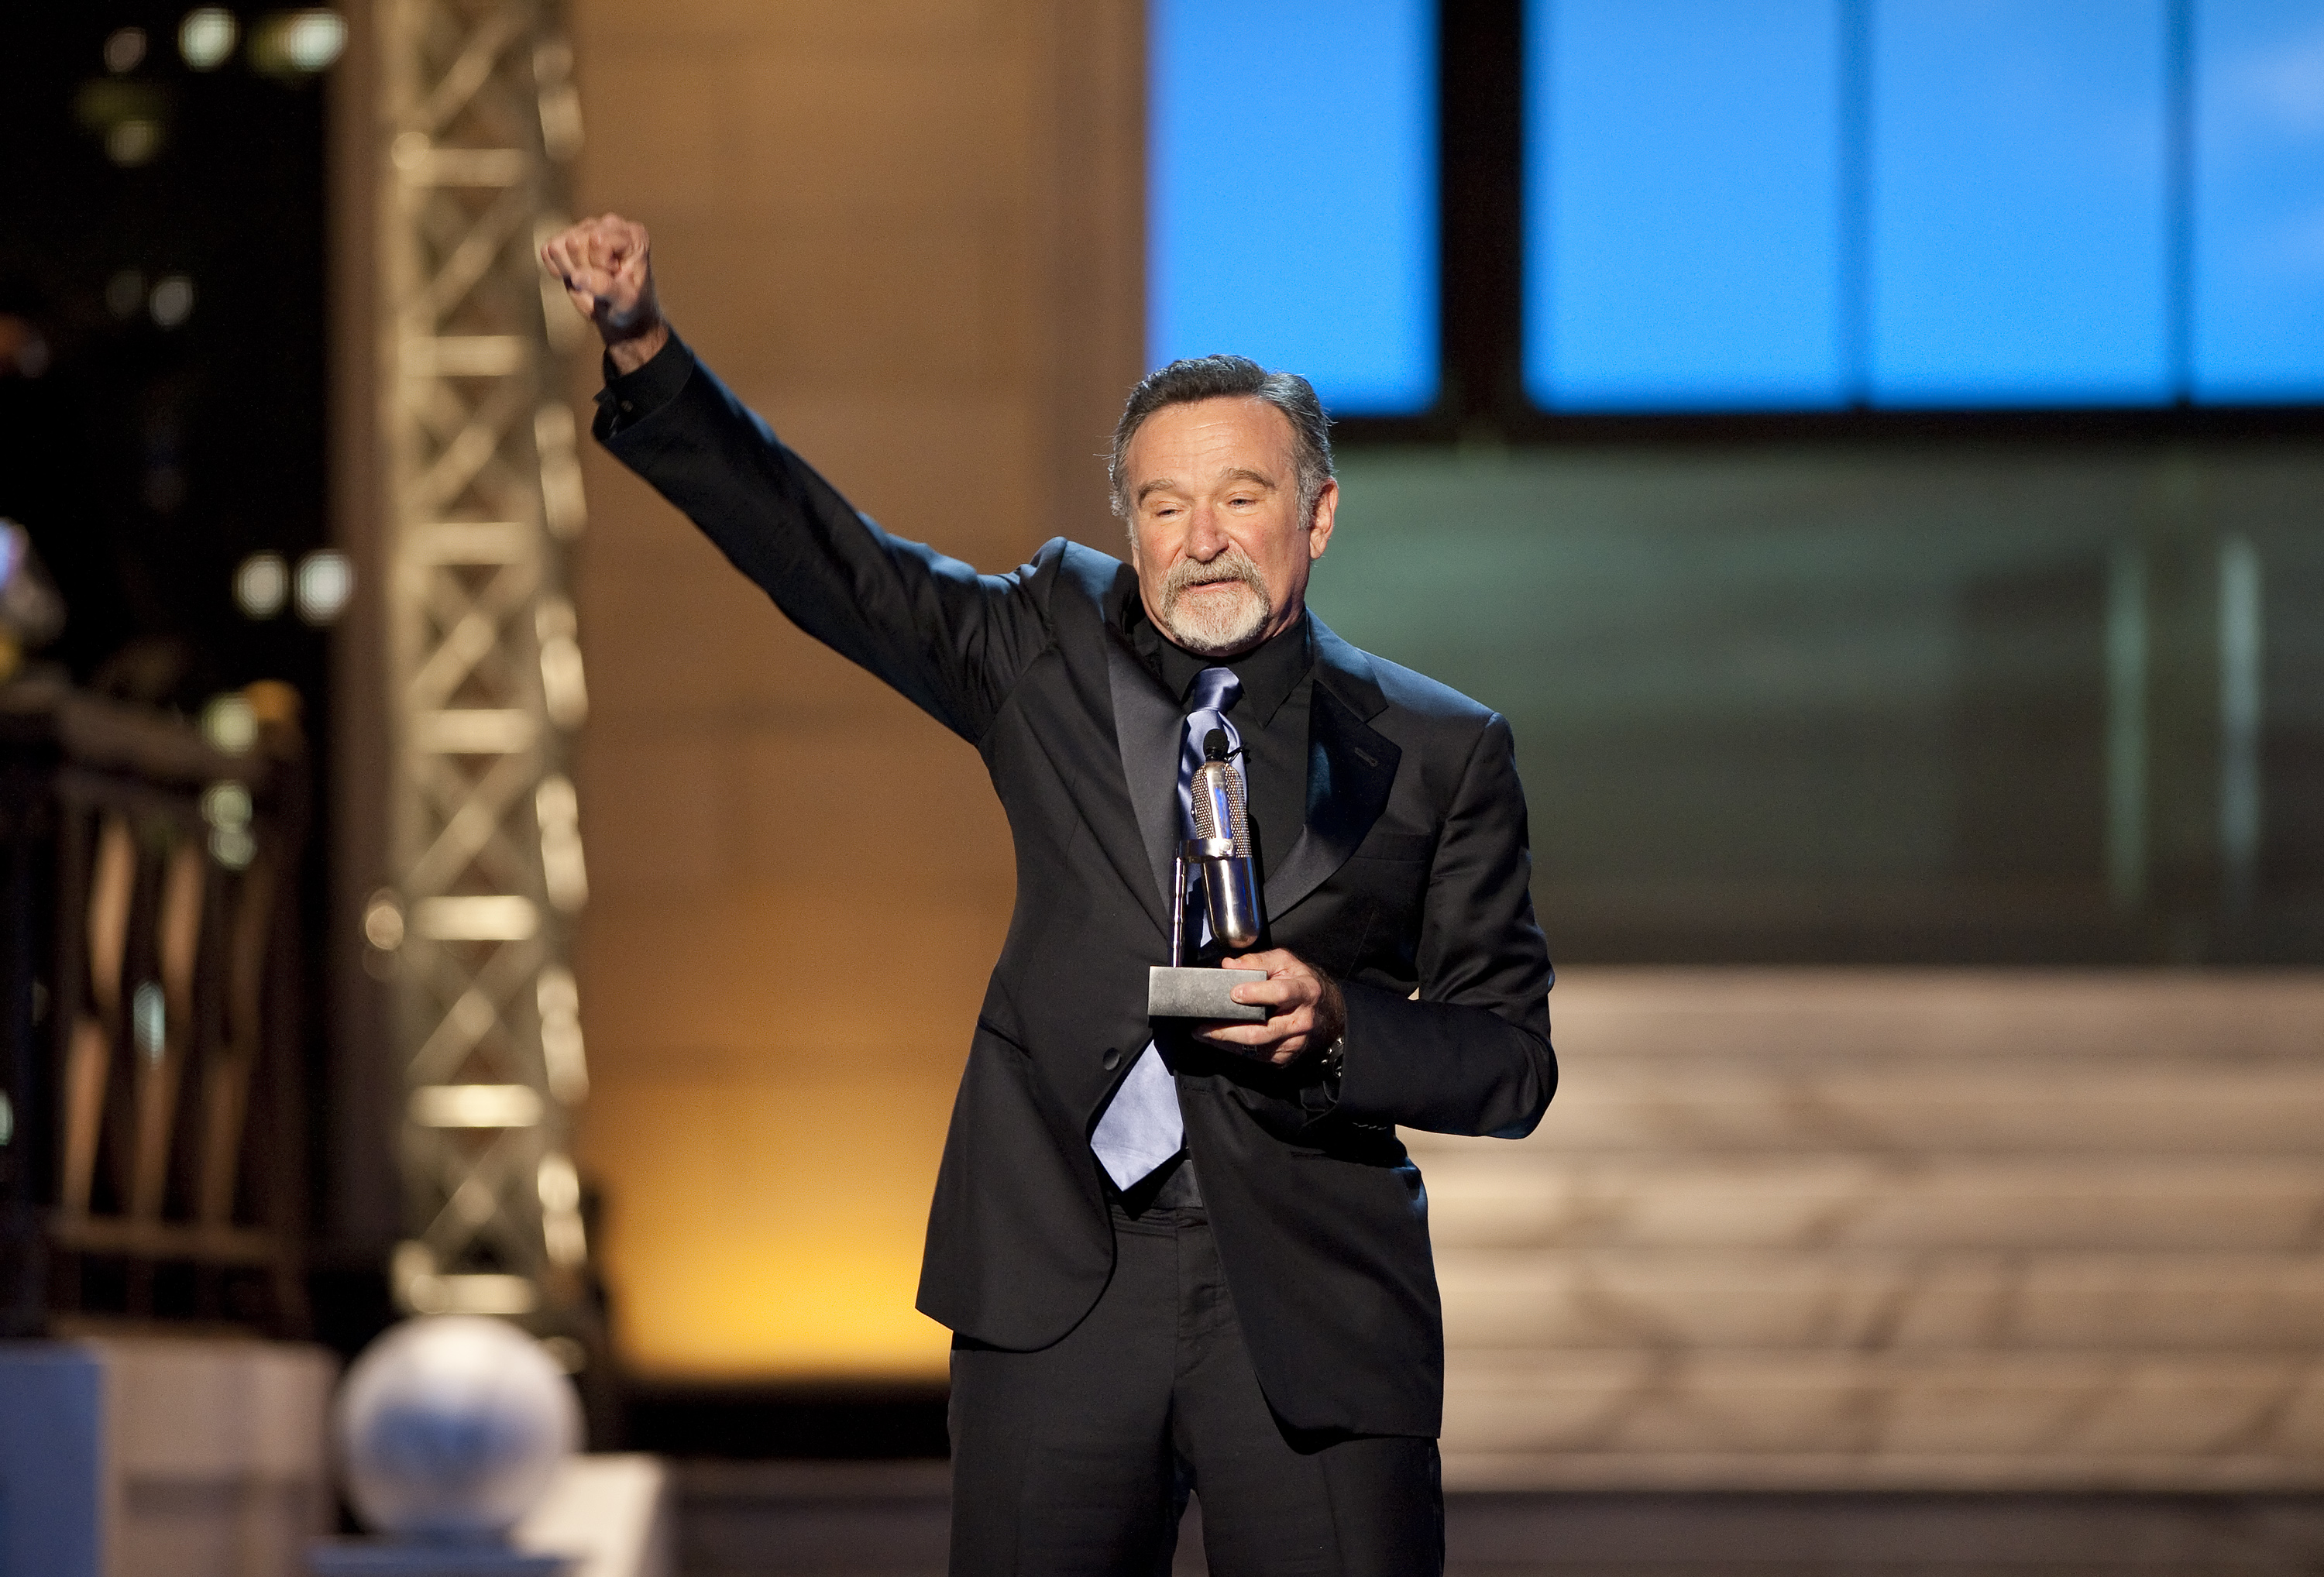 Comedian Robin Williams reacts after receiving the Stand Up Icon Award during the second annual 2012 Comedy Awards in New York